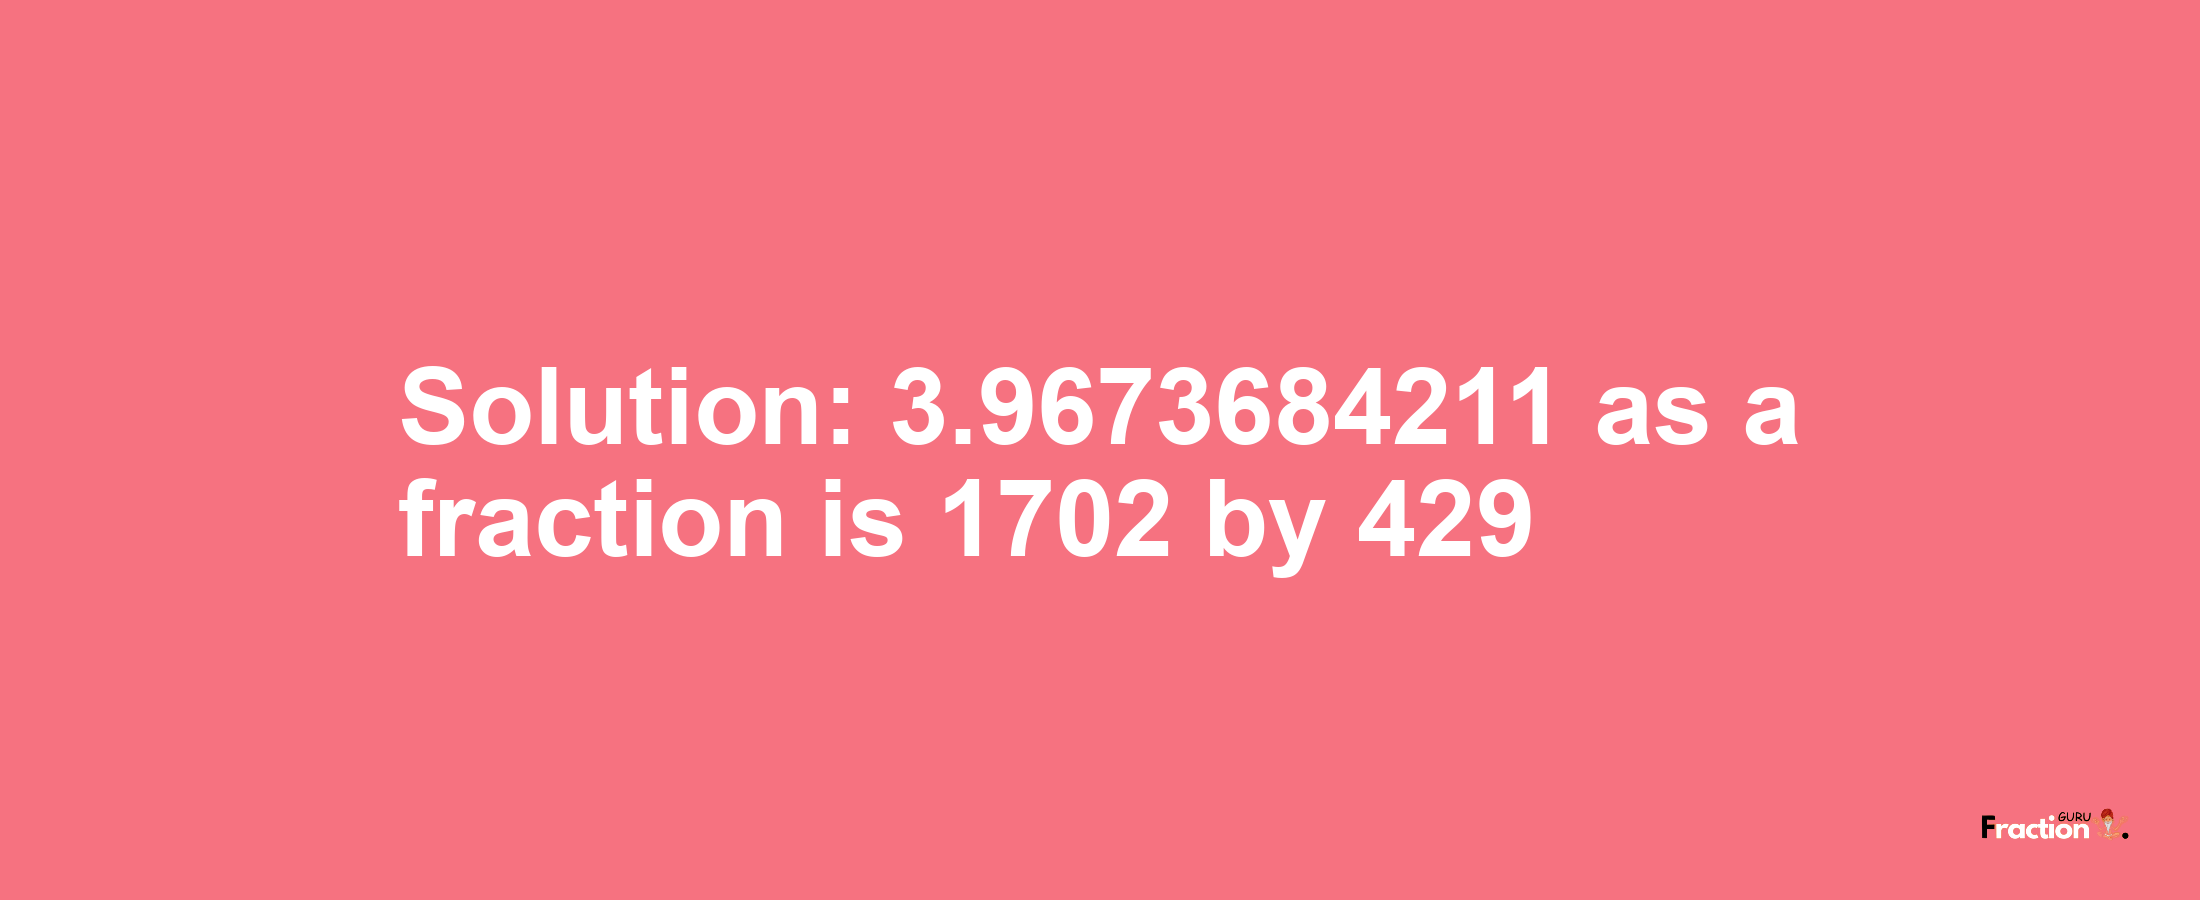 Solution:3.9673684211 as a fraction is 1702/429